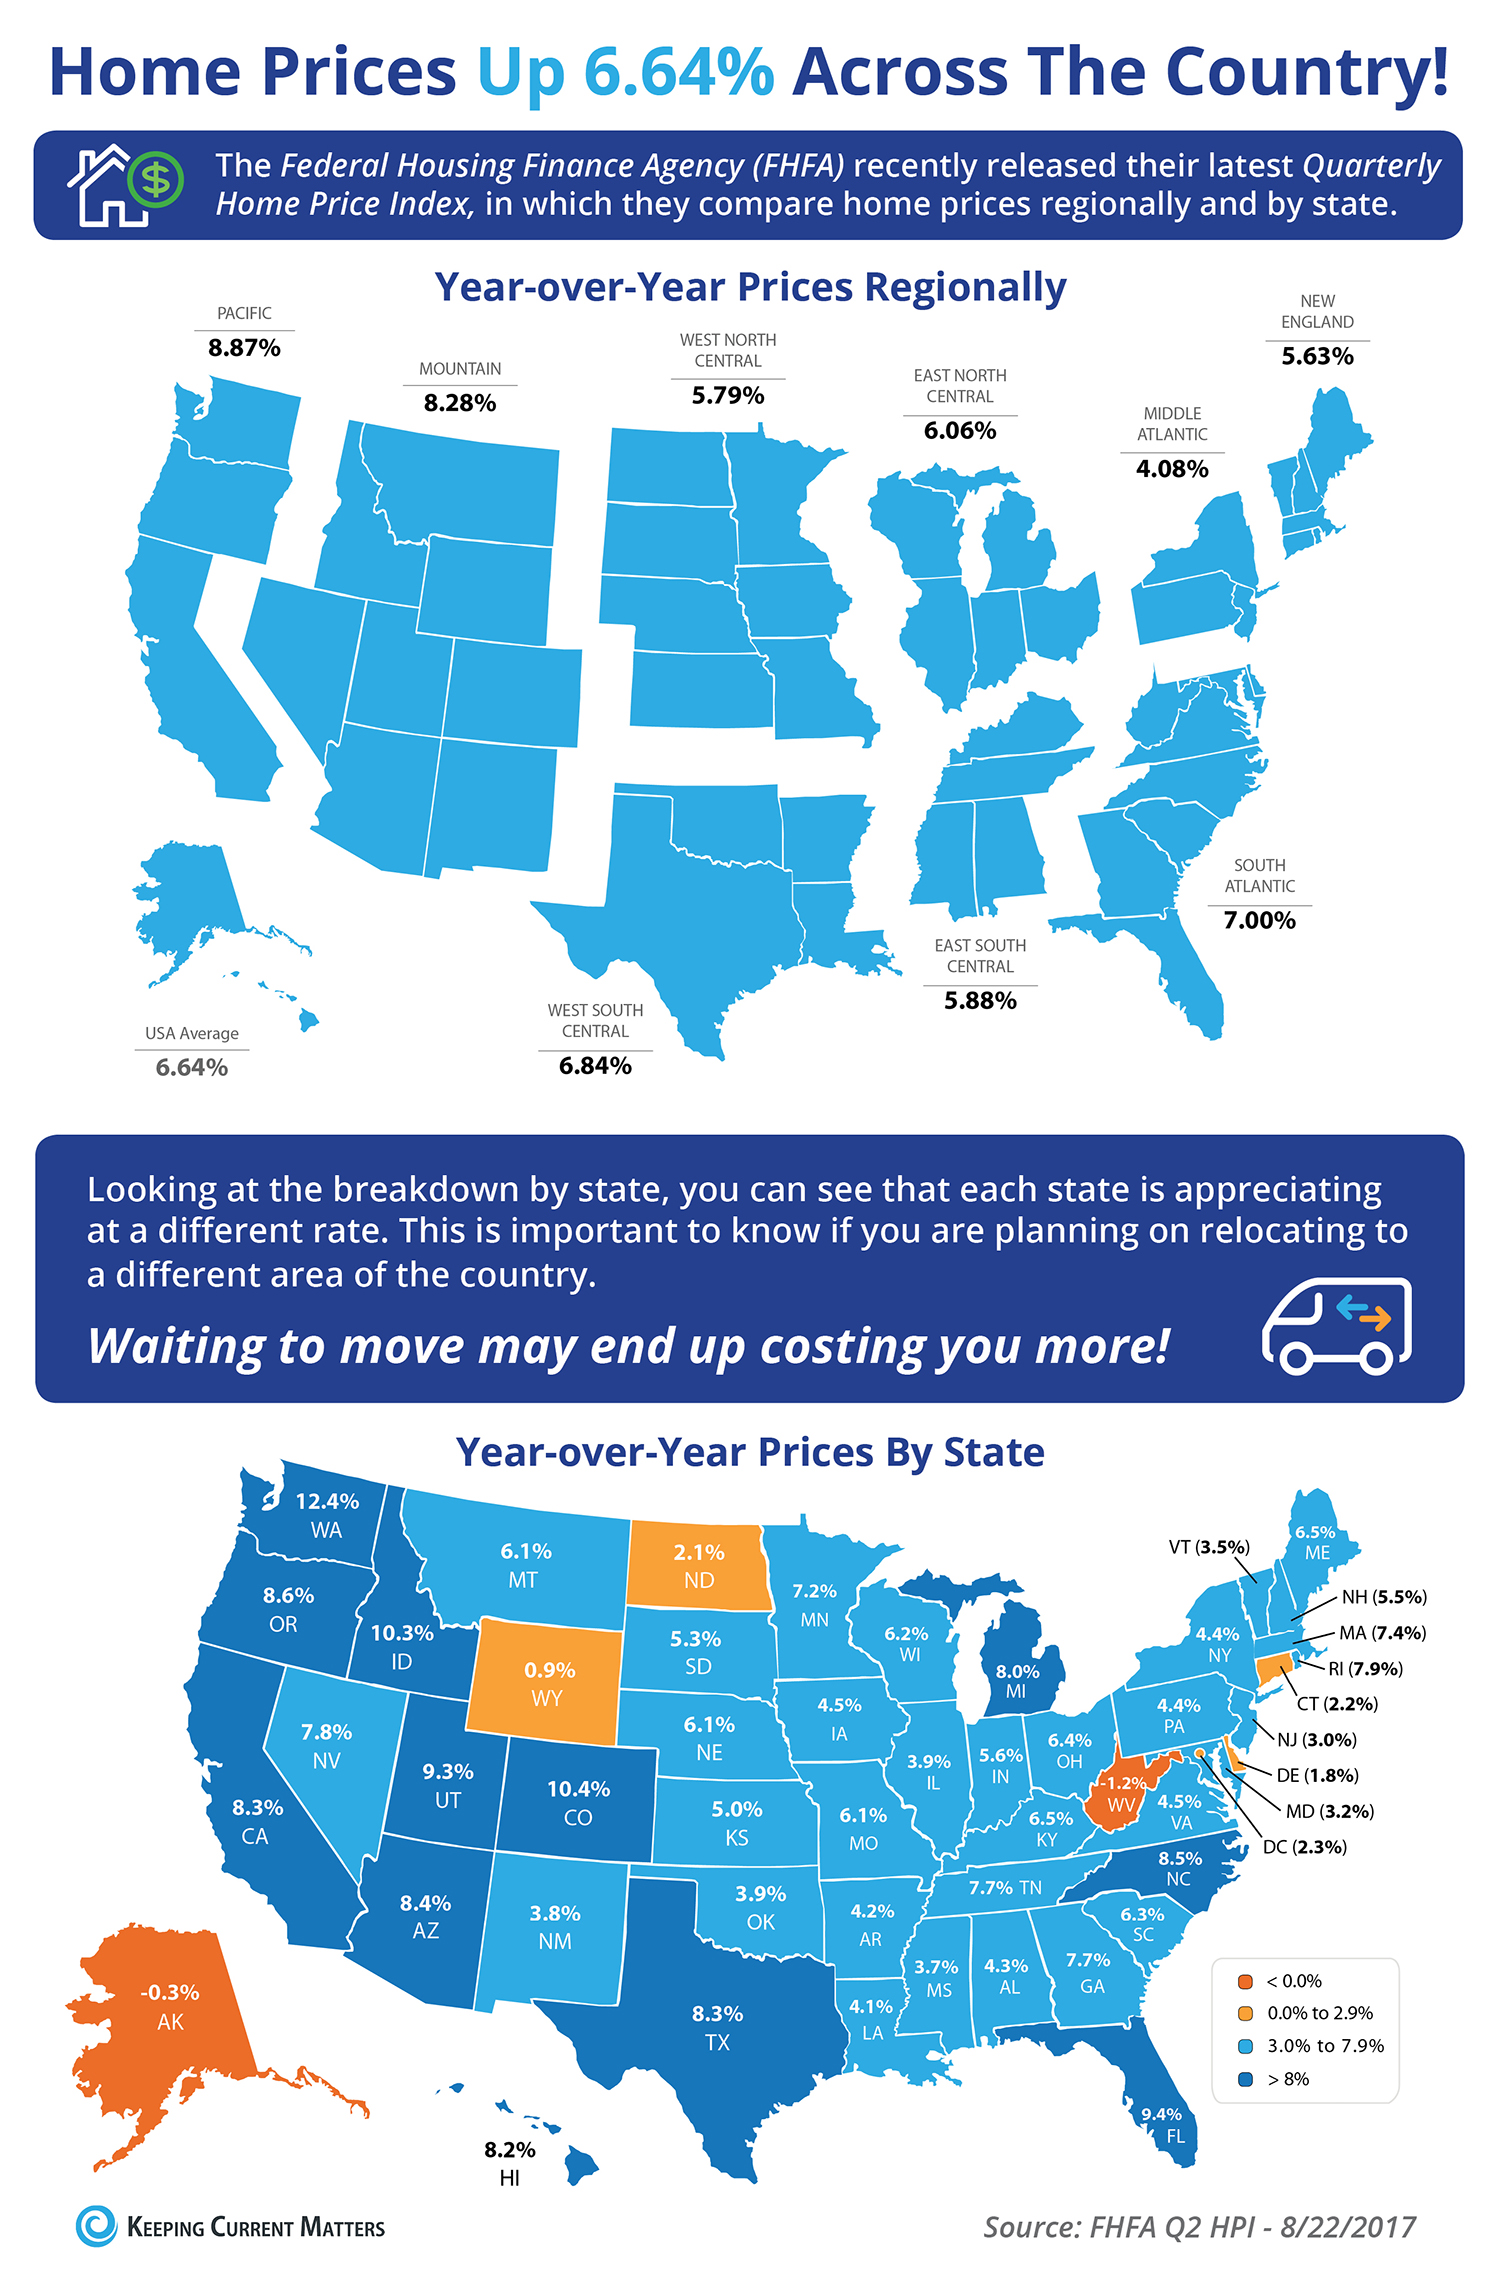 Home Prices Up 6.64% Across the Country! [INFOGRAPHIC] | Keeping Current Matters